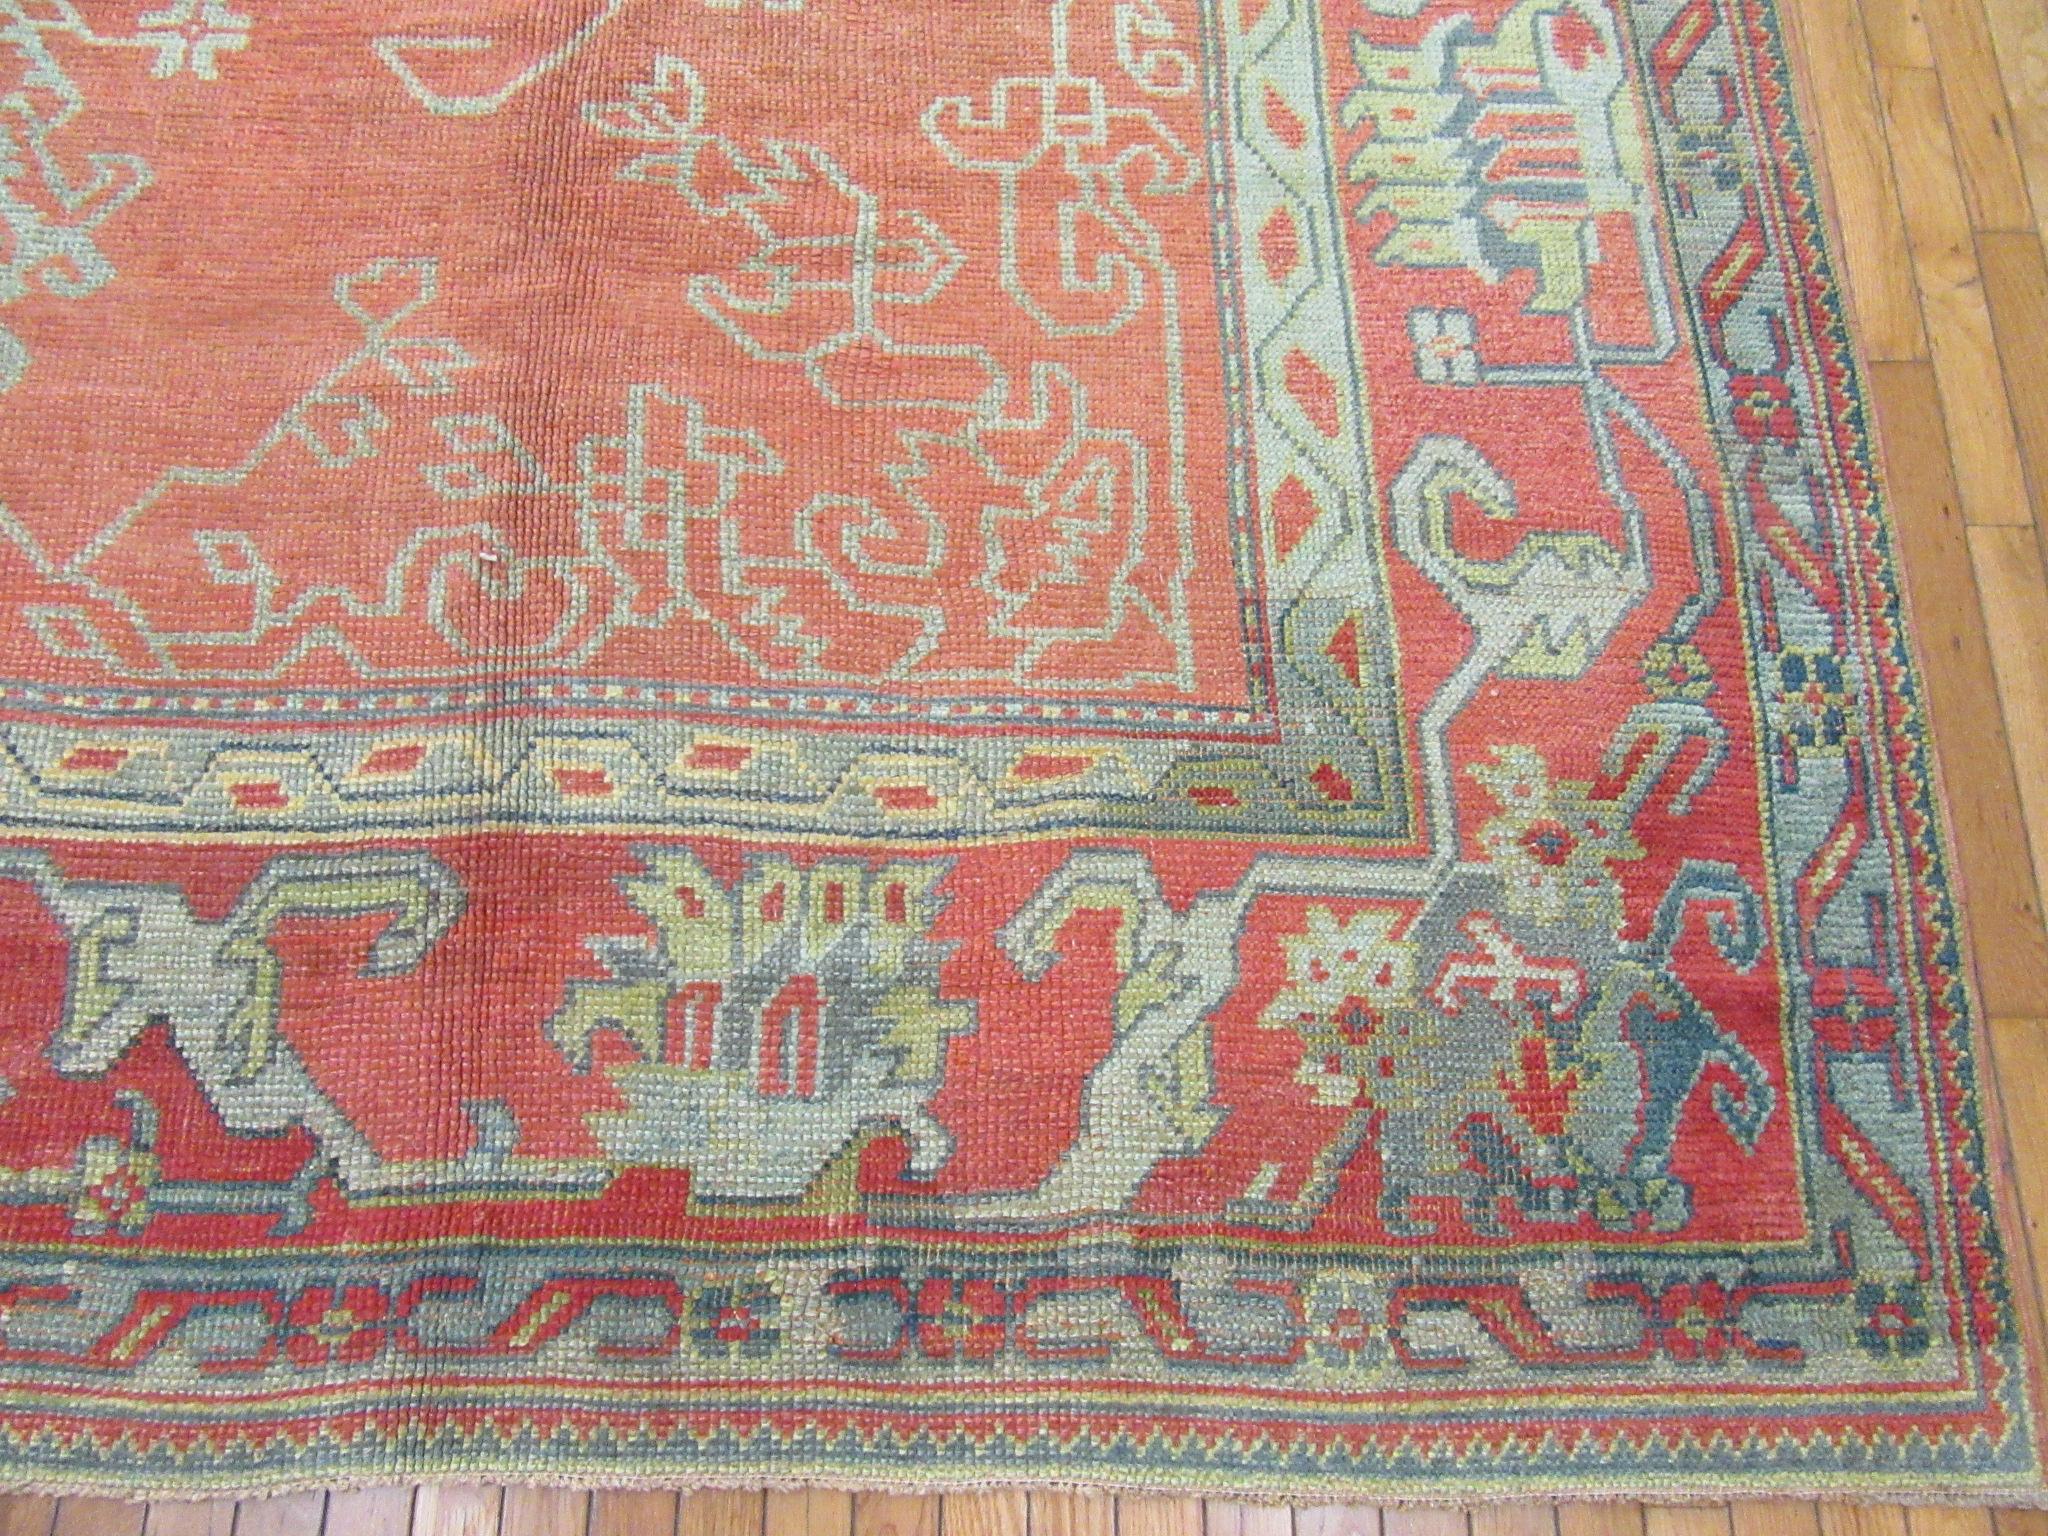 Large Antique Hand-Knotted Wool Coral Red Green Turkish Oushak Rug For Sale 1